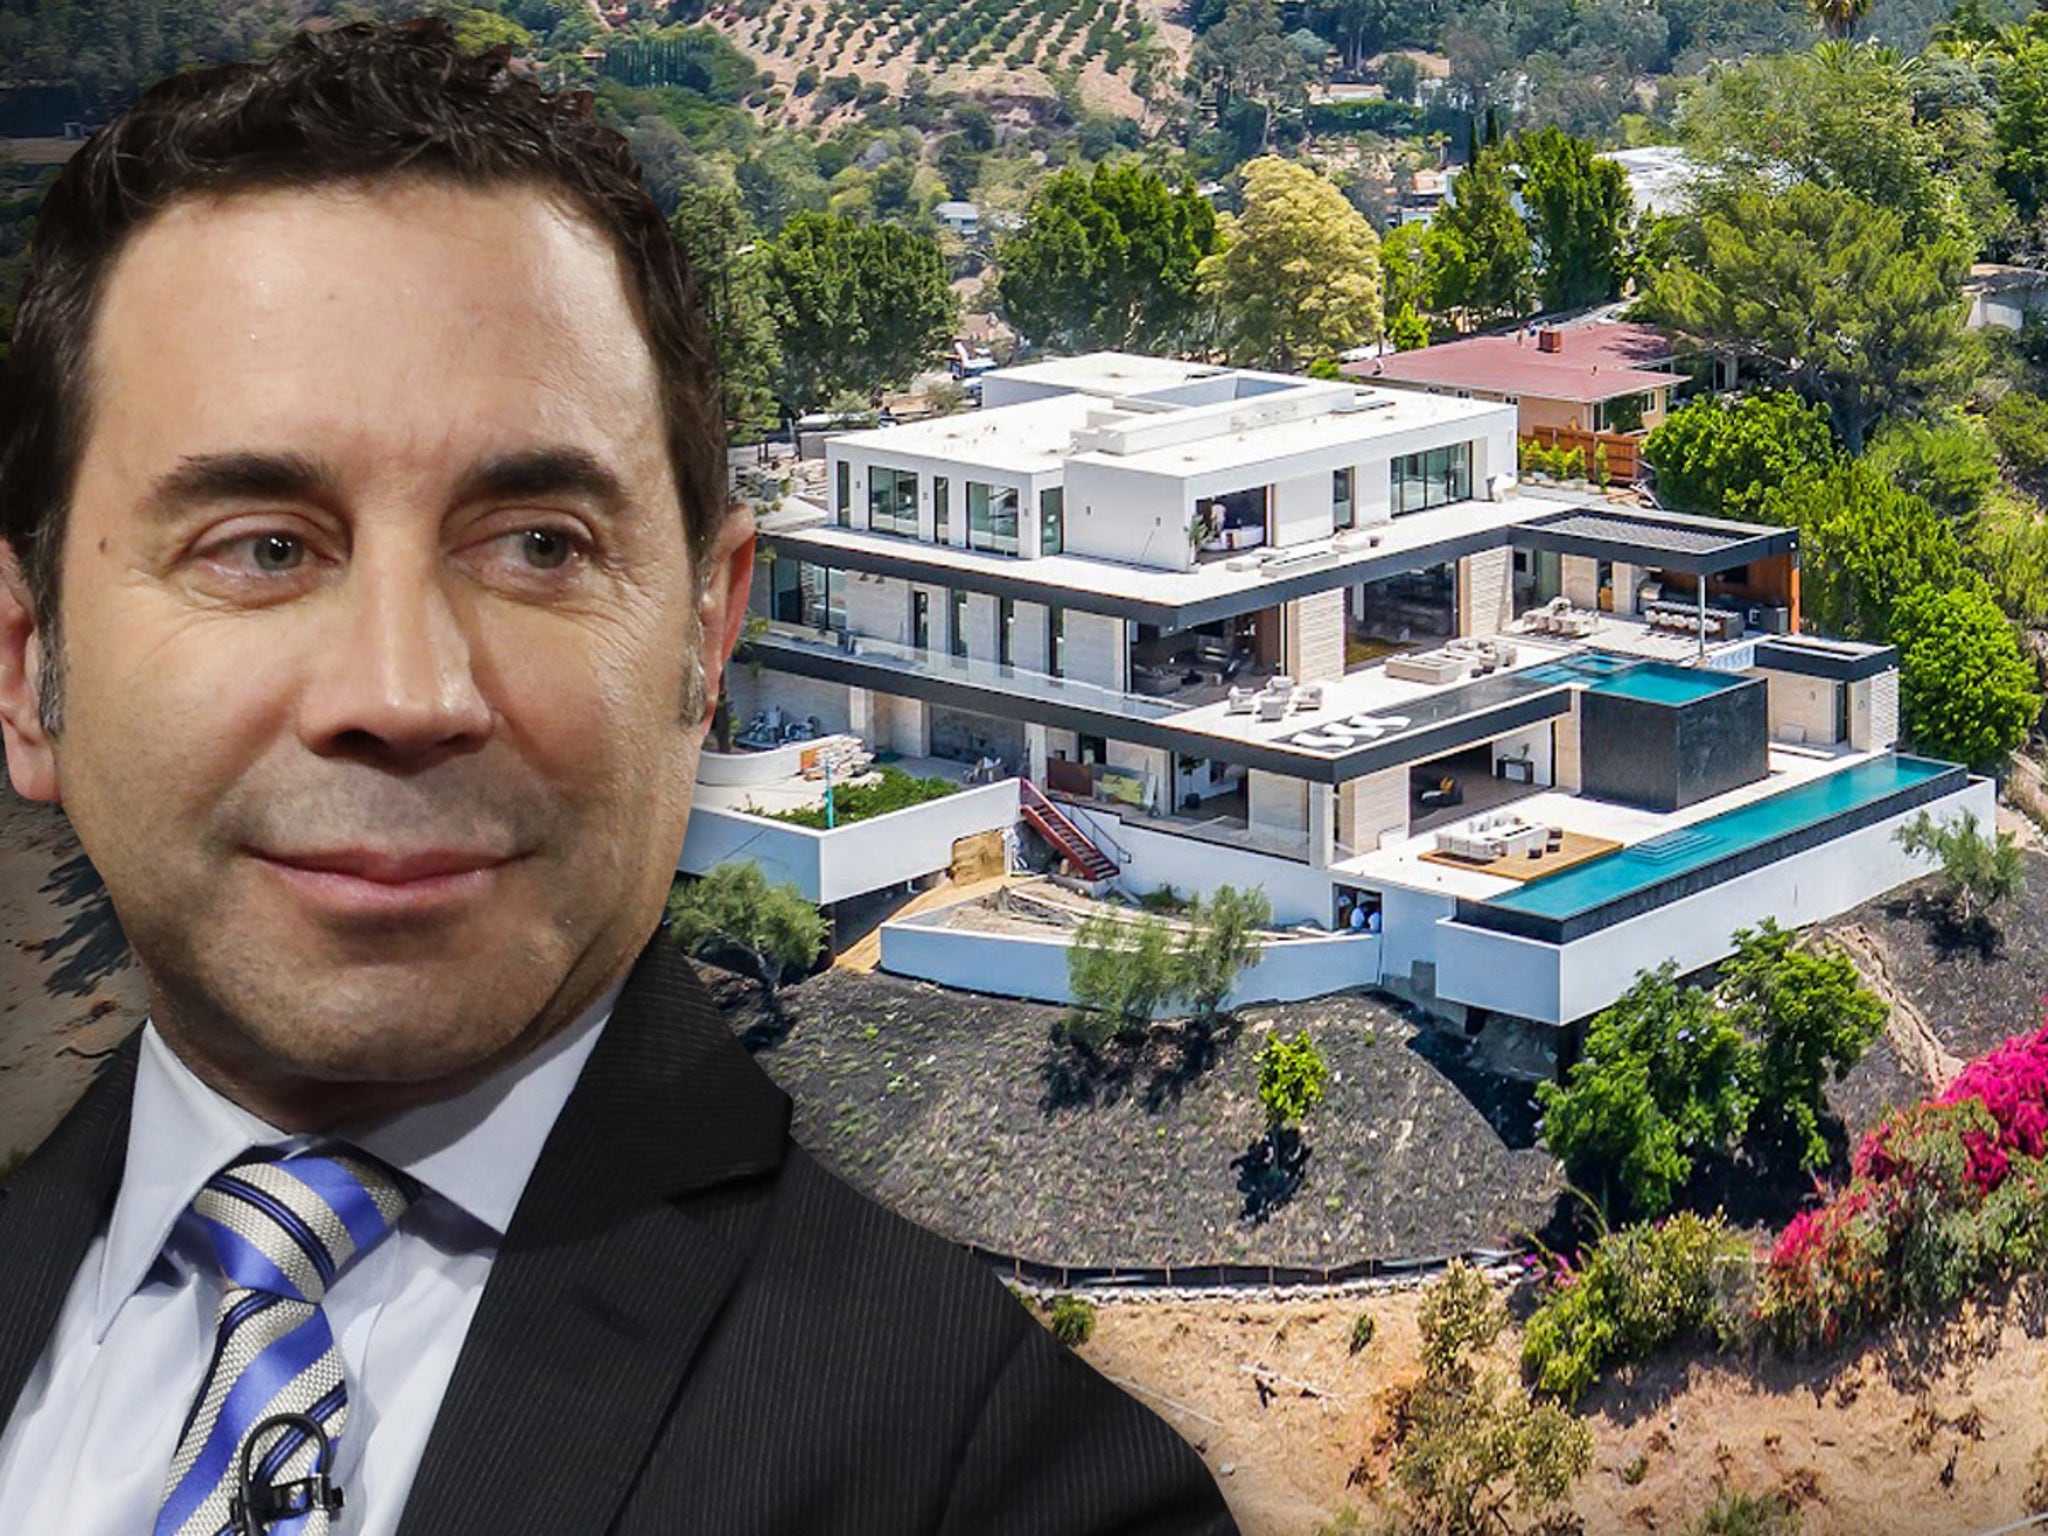 Botched' Star Dr. Paul Nassif Sells Bel-Air Home for $20.4M